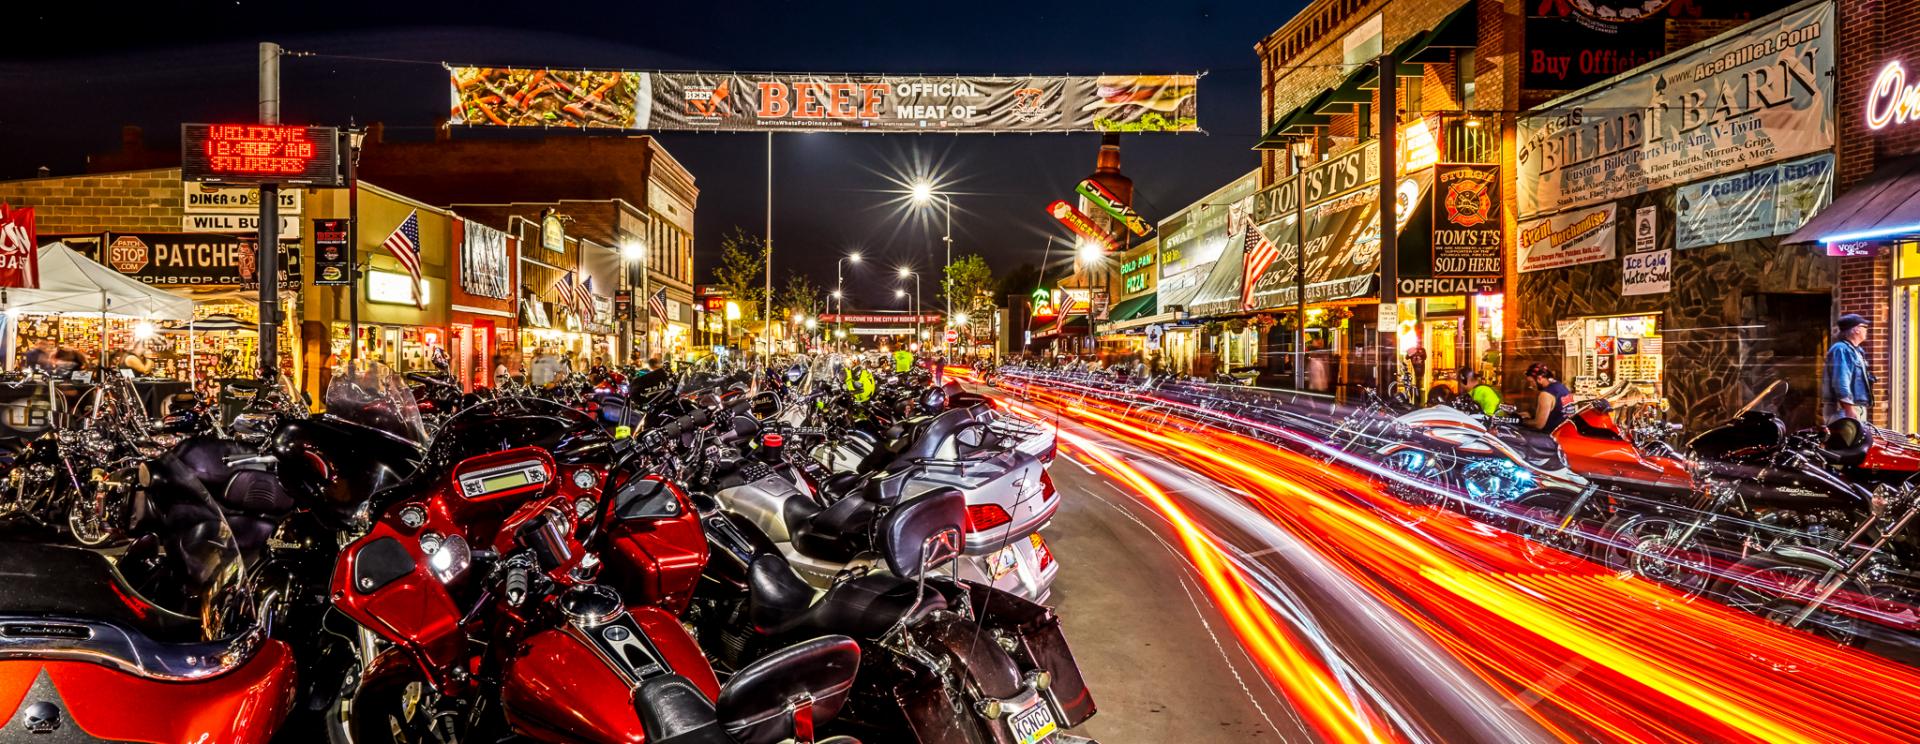 84th Annual Sturgis Motorcycle Rally